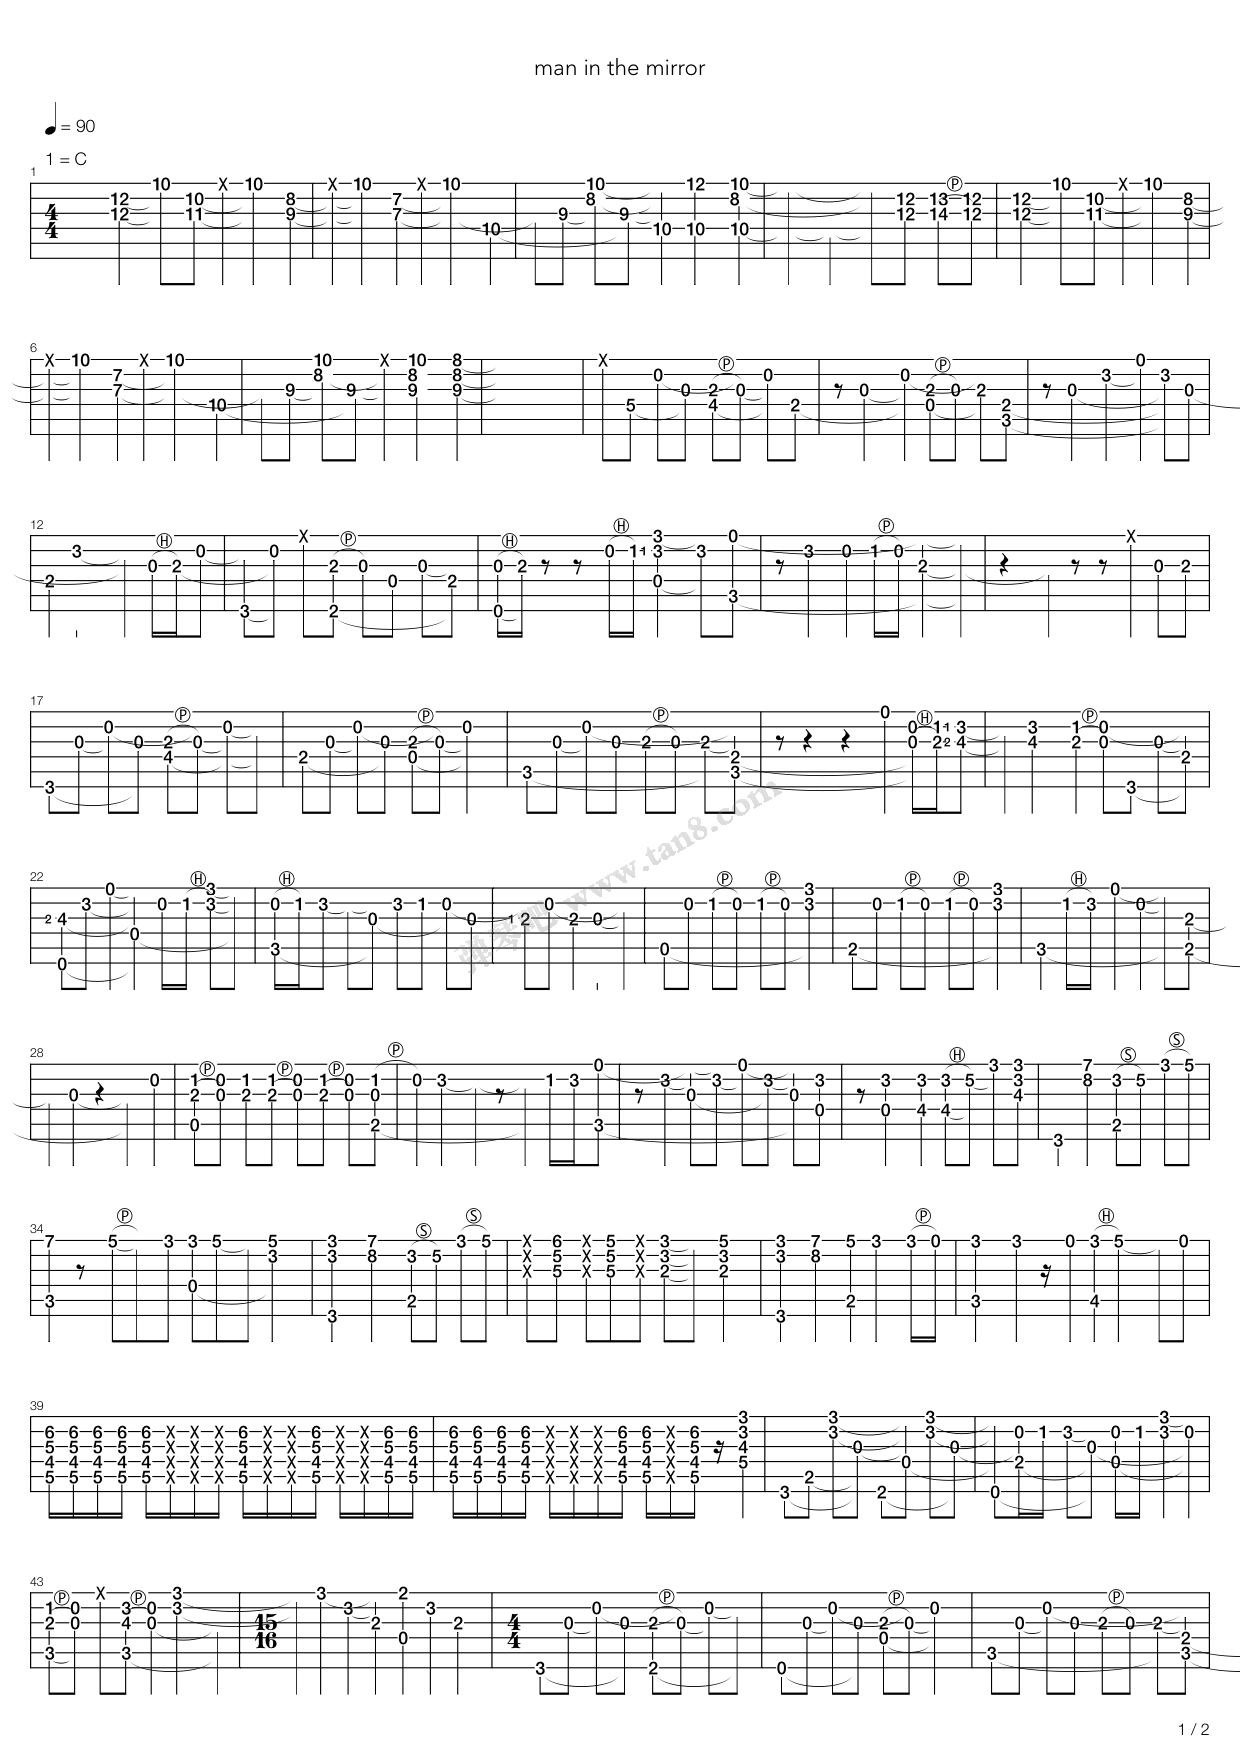 Man In The Mirror By Michael Jackson Guitar Tabs Chords Sheet Music Free Learnguitarsonline Com